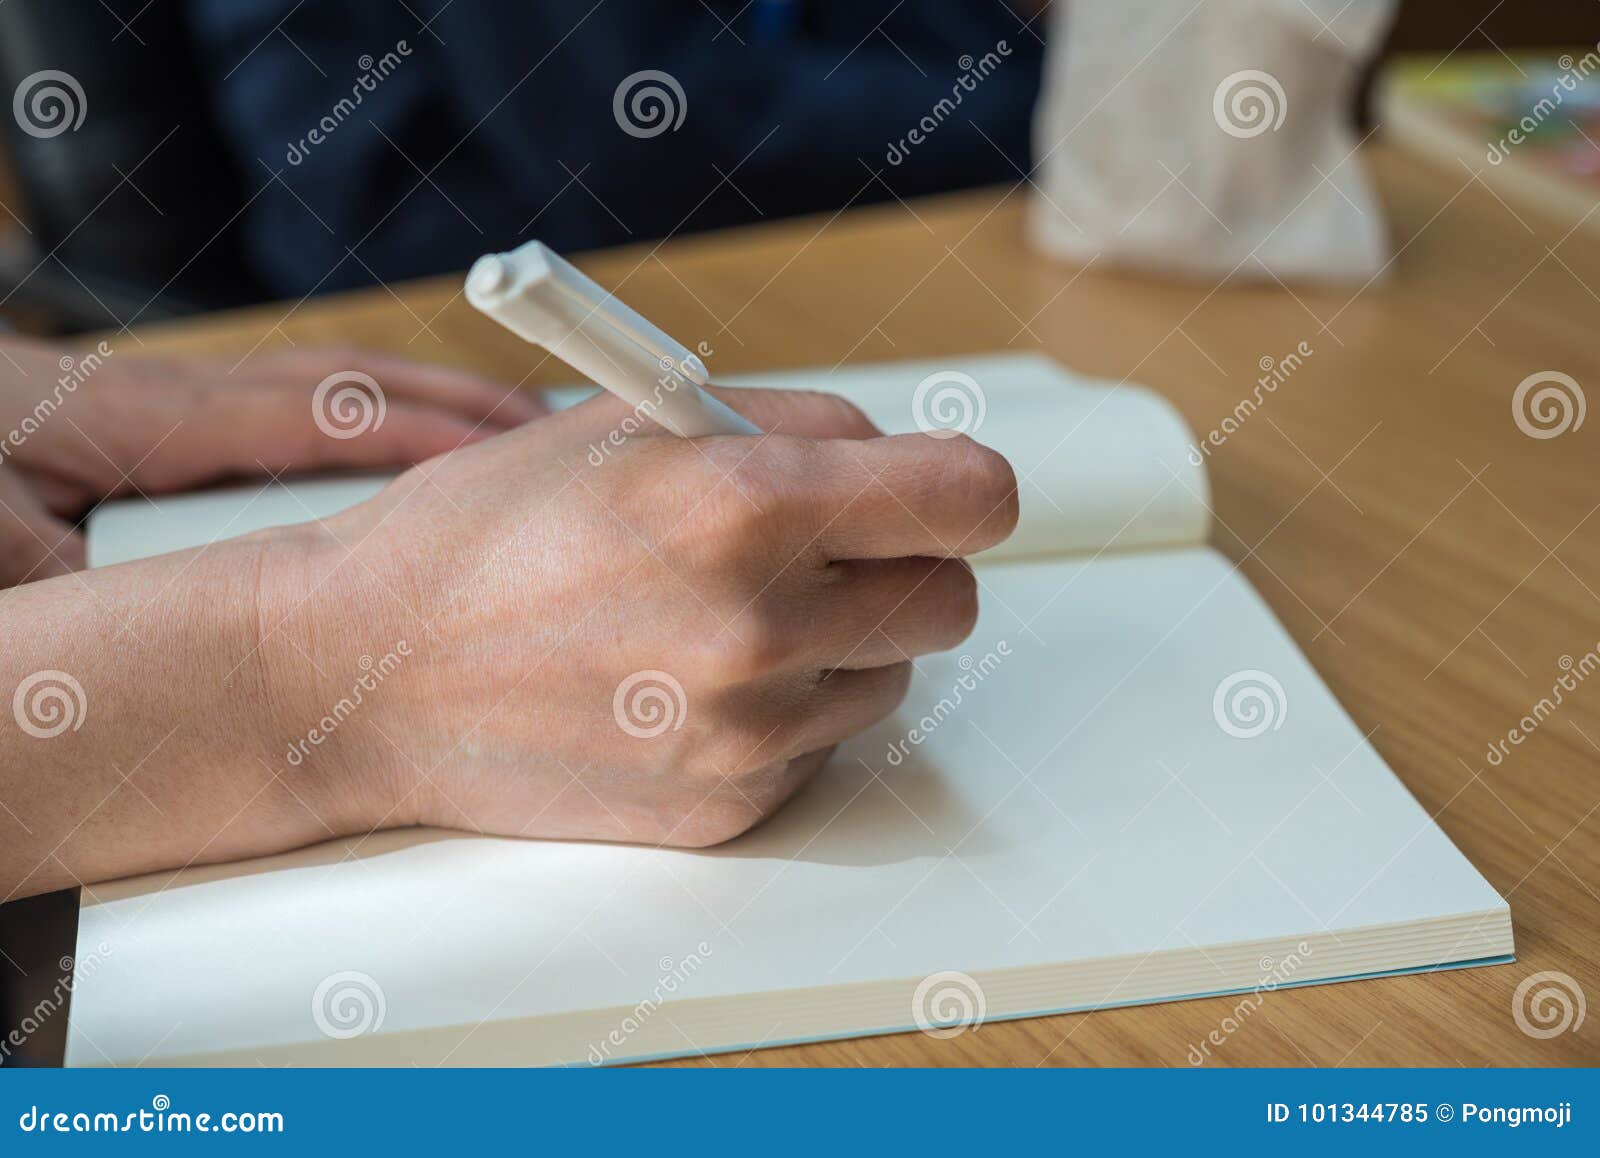 Hand of Woman Holding a Pen for Write To a Book Stock Image - Image of ...